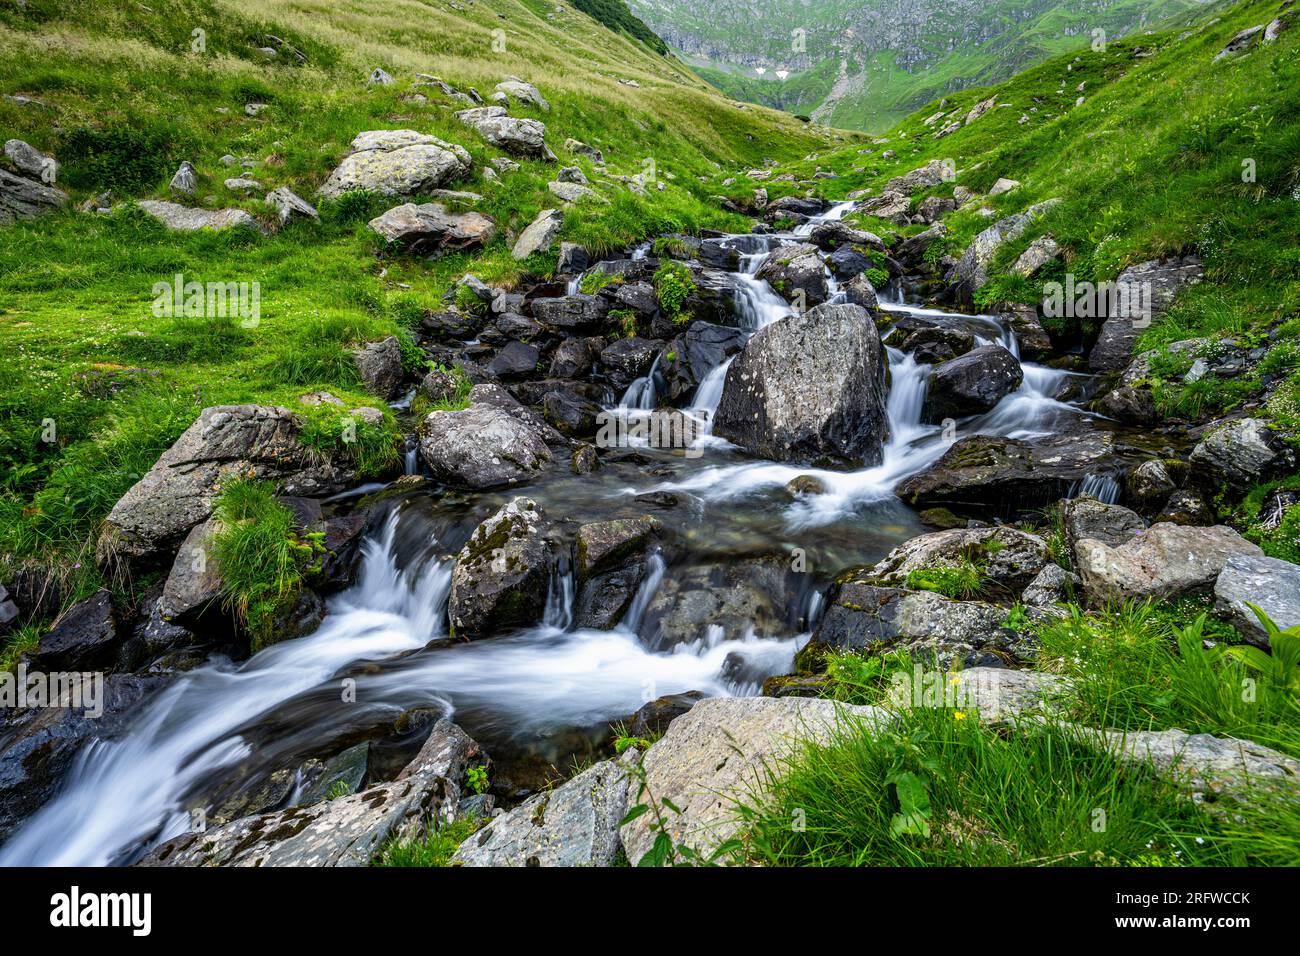 Summer landscape of the Fagaras Mountains, Romania. A view from the hiking trail near the Balea Lake and the Transfagarasan Road. Stock Photo